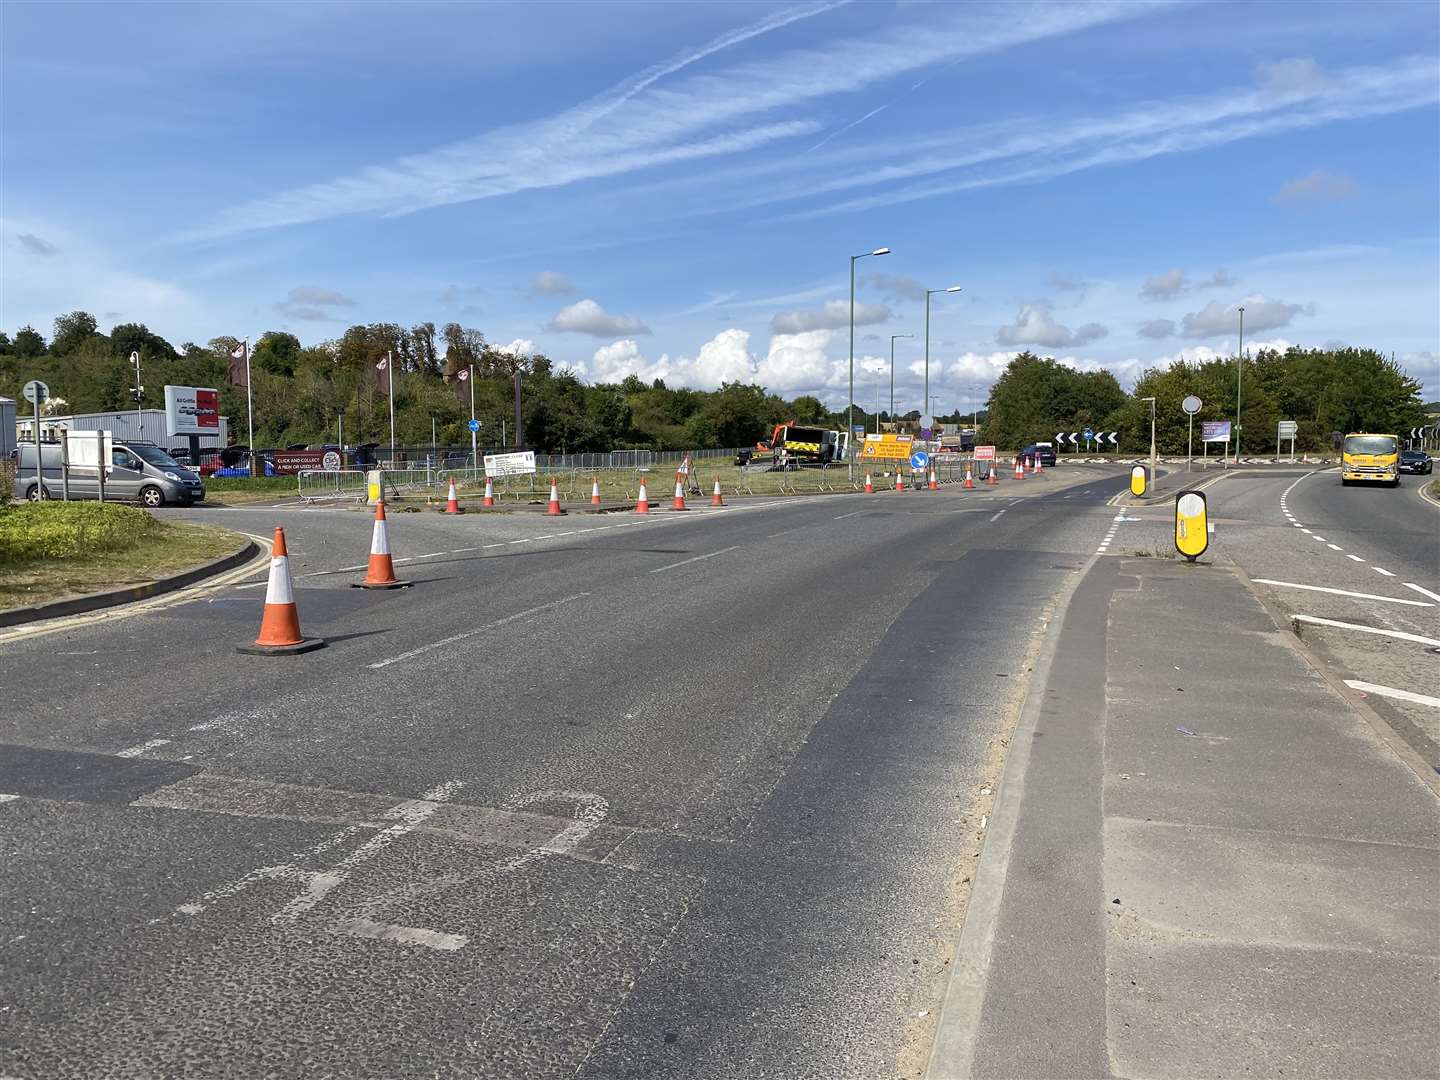 Roadworks to create a sliproad off the Medway City Estate on the Anthonys Way roundabout started in September as part of a £2m project to ease congestion